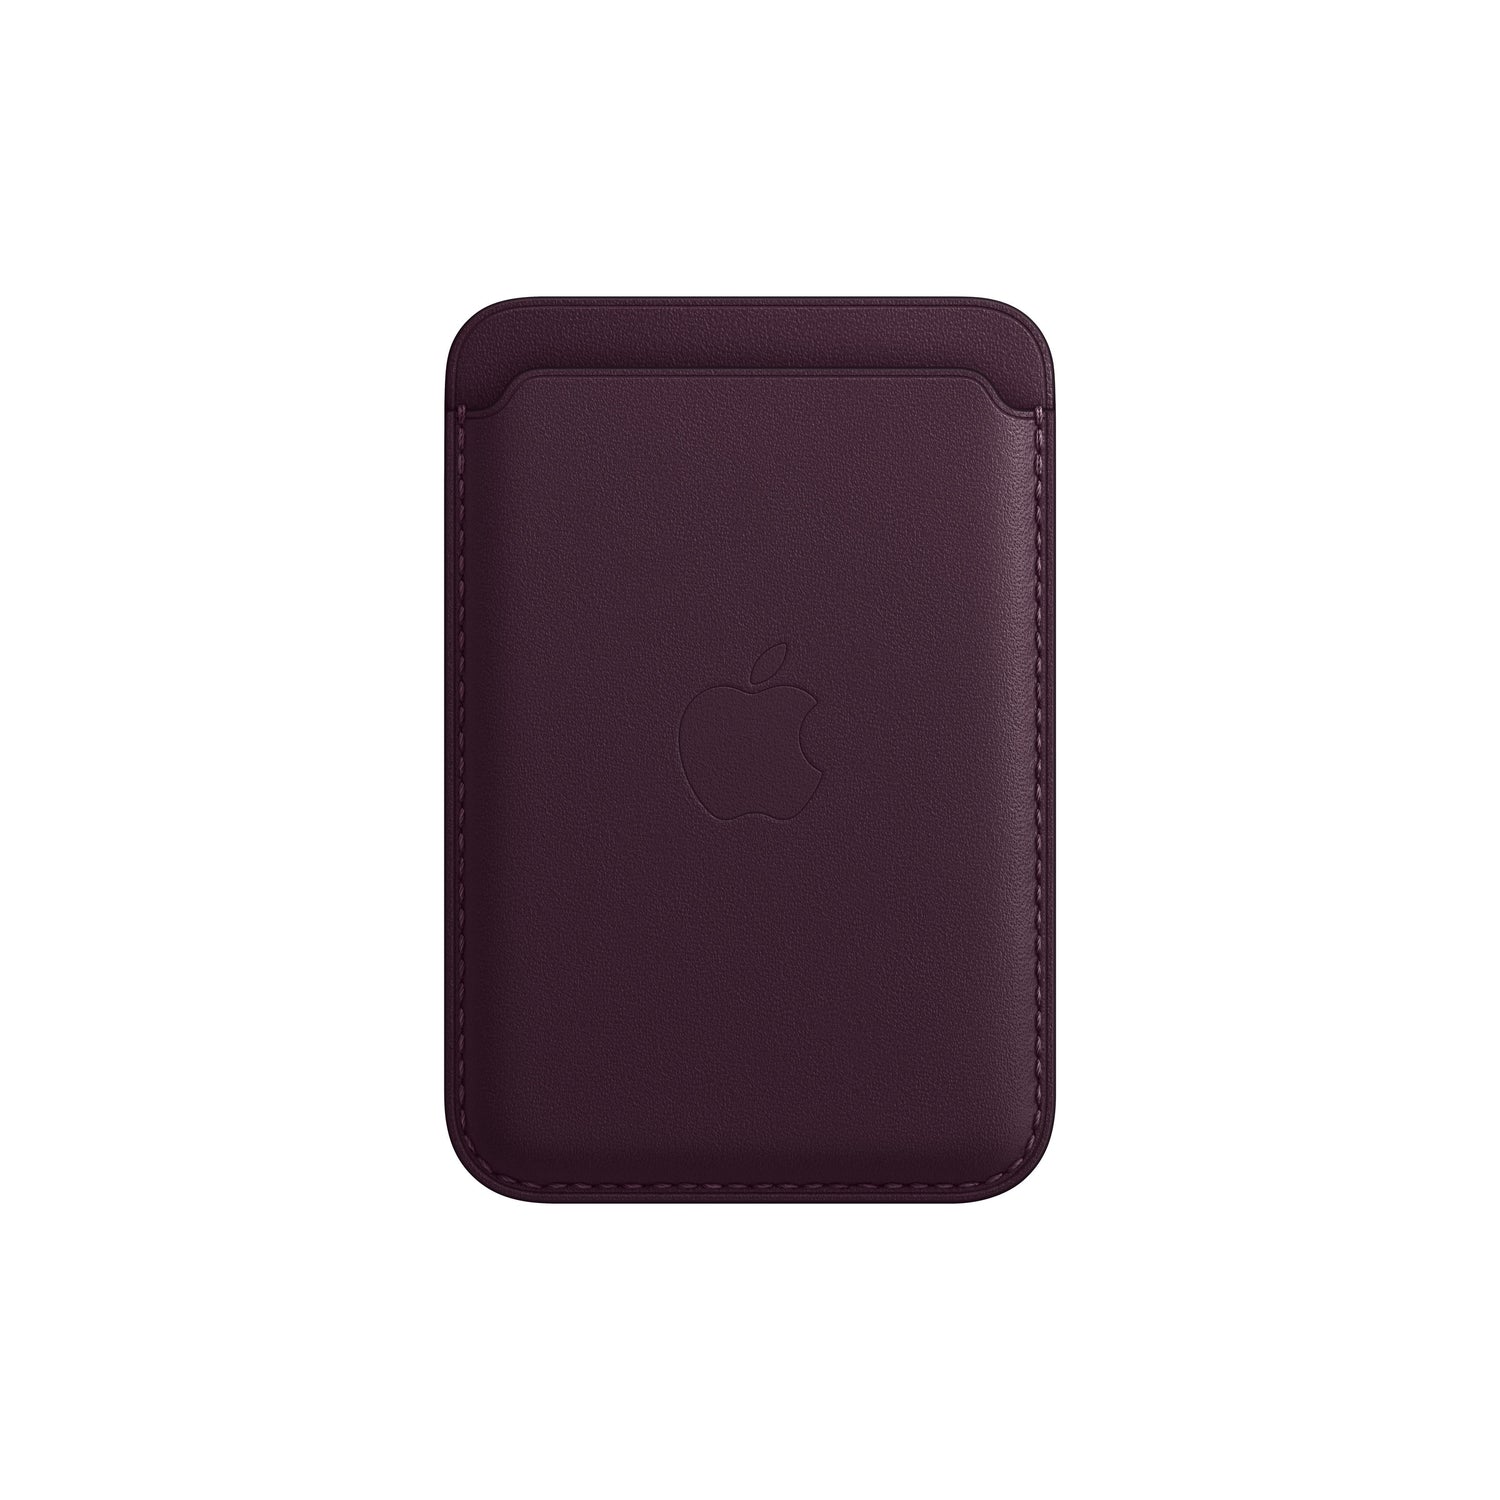 iPhone Leather Wallet with MagSafe - Dark Cherry